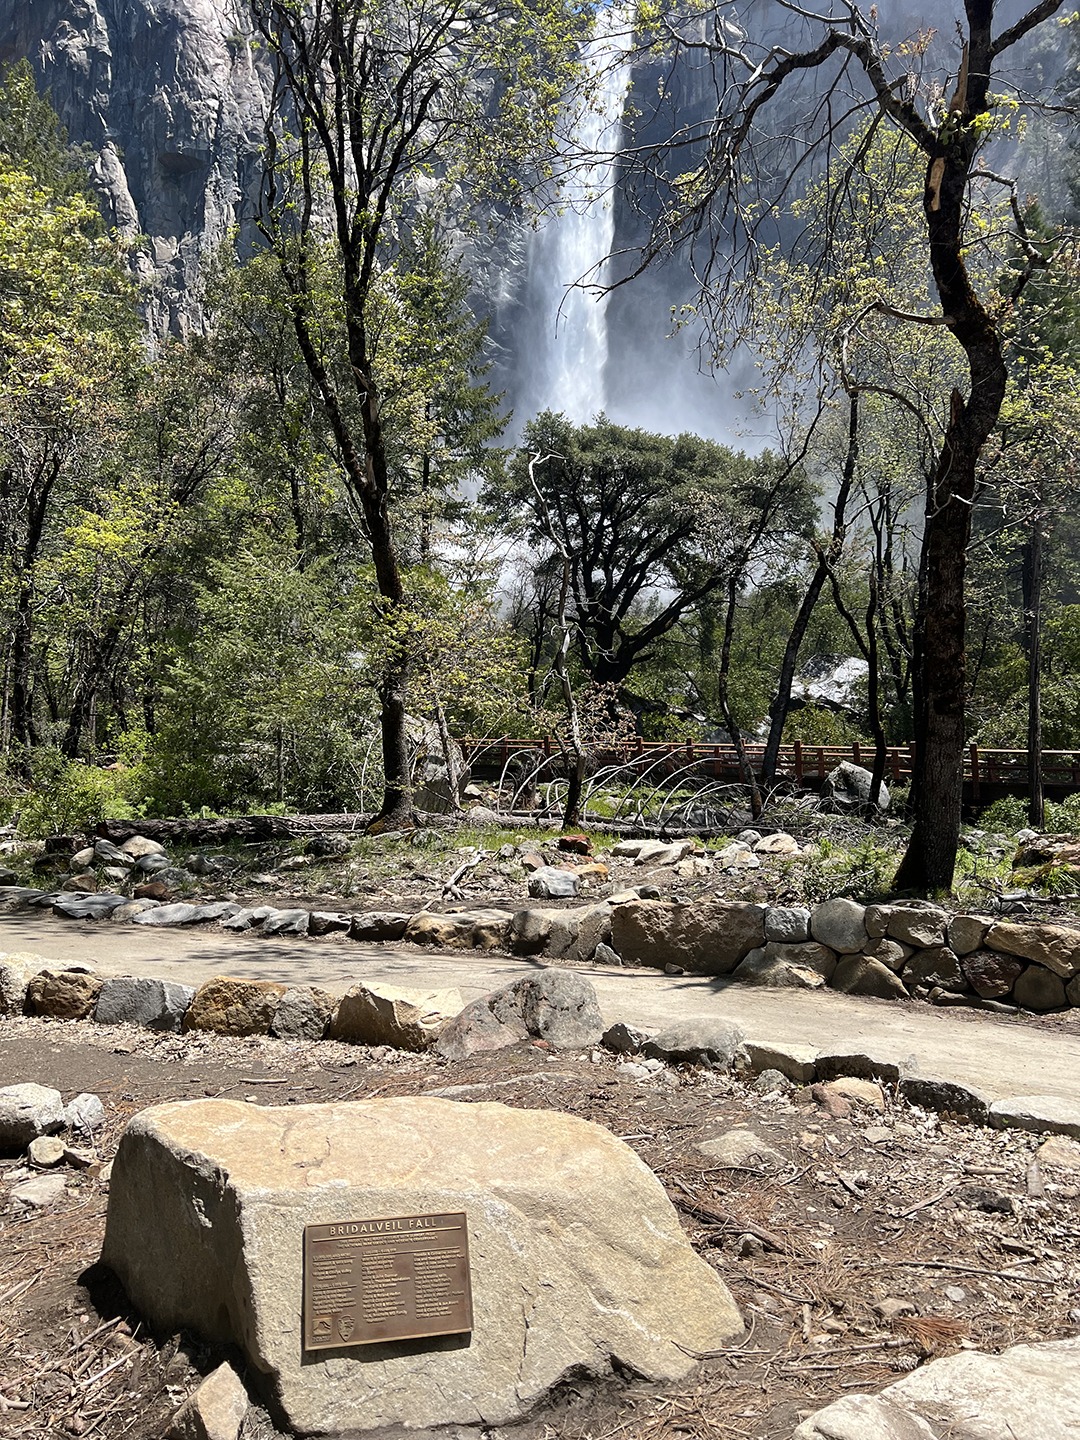 In June of this year, a bronze plaque was installed at the site at Bridalveil Fall to recognize major donors. Image: Laurie Peterson